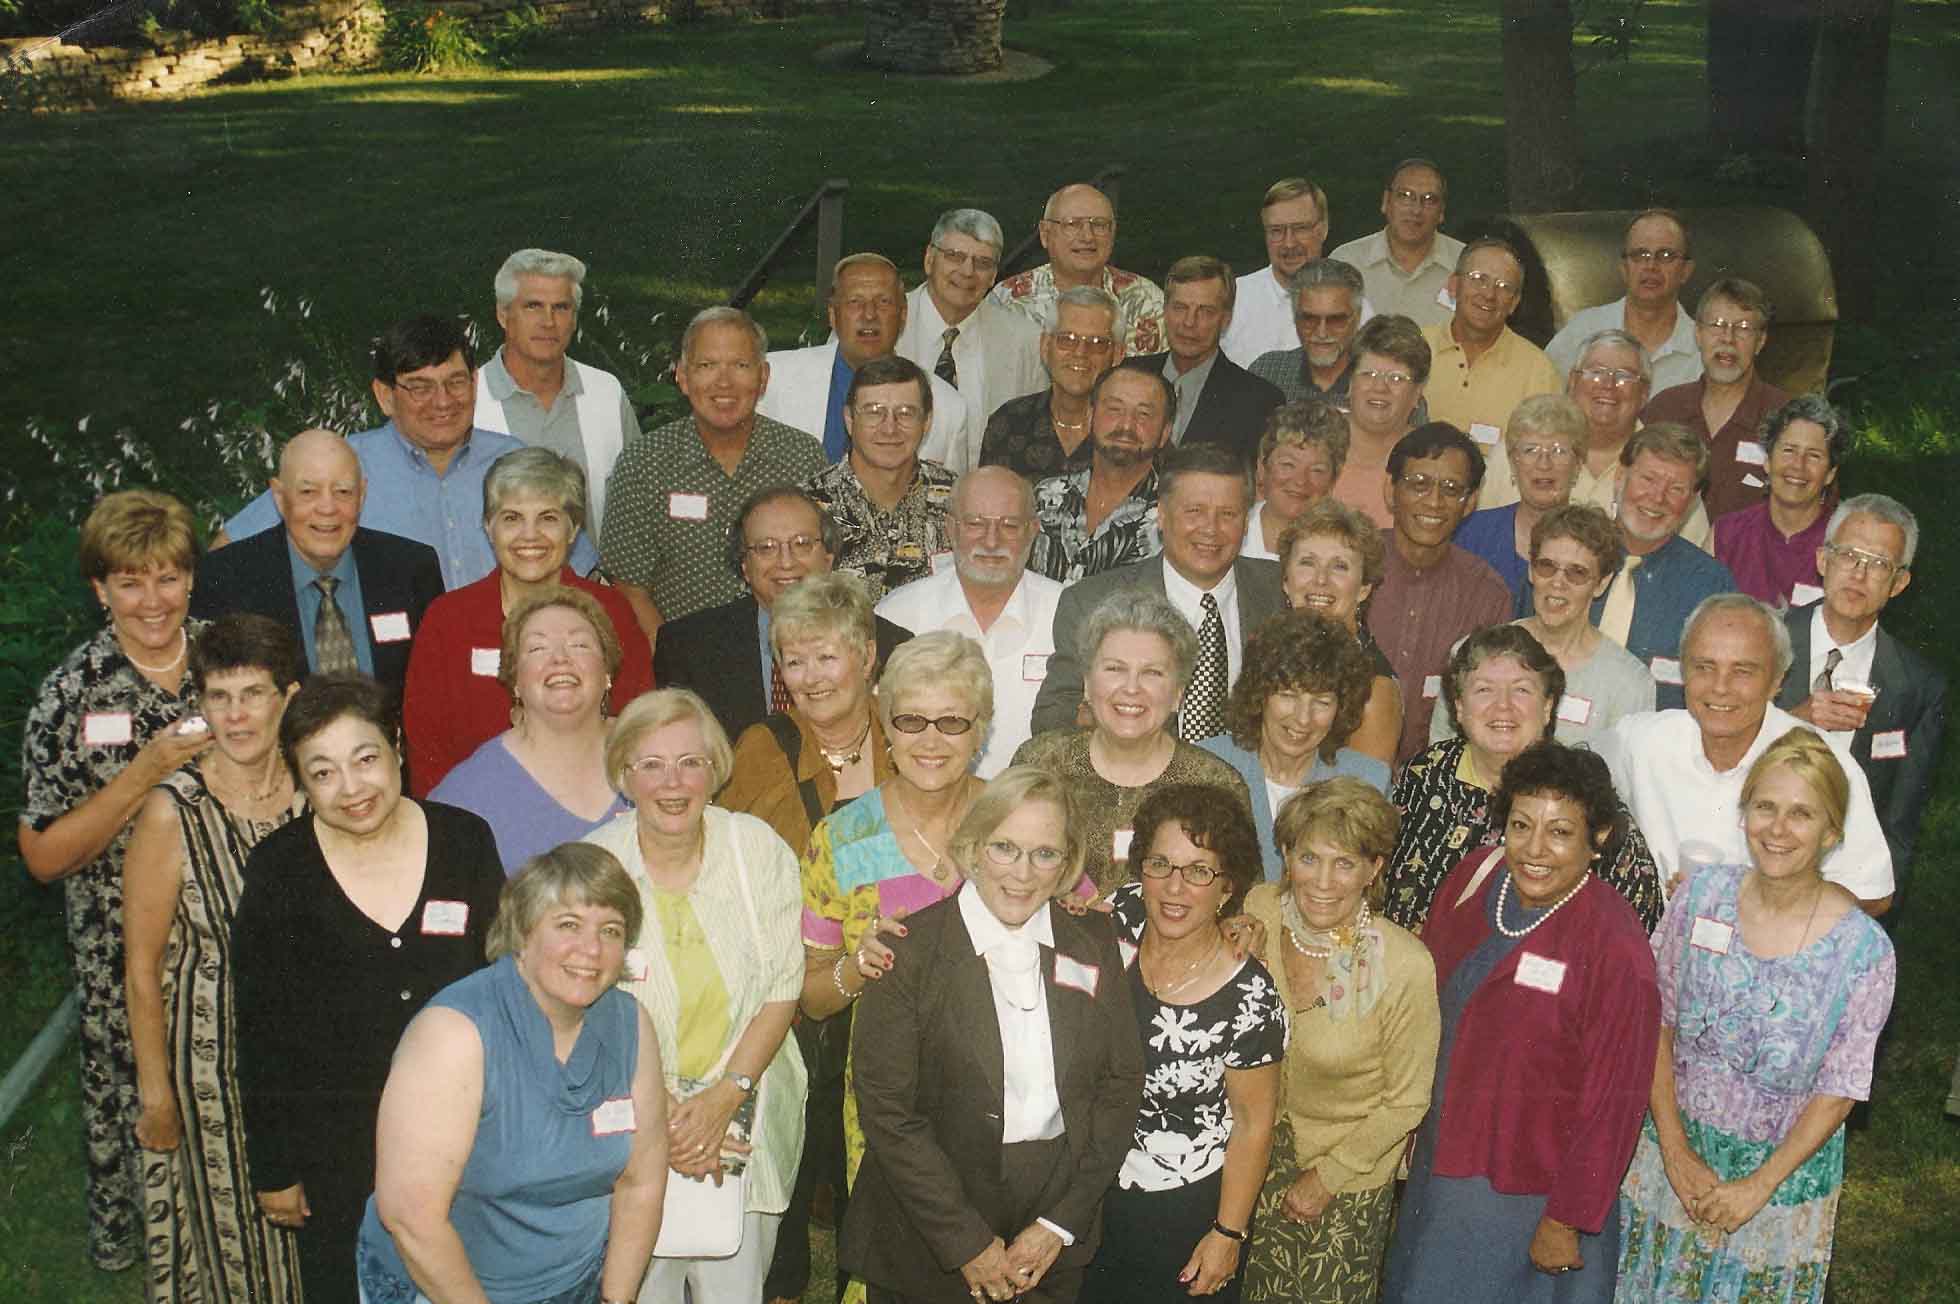 Marshall HS class of 1961 and 41st reunion